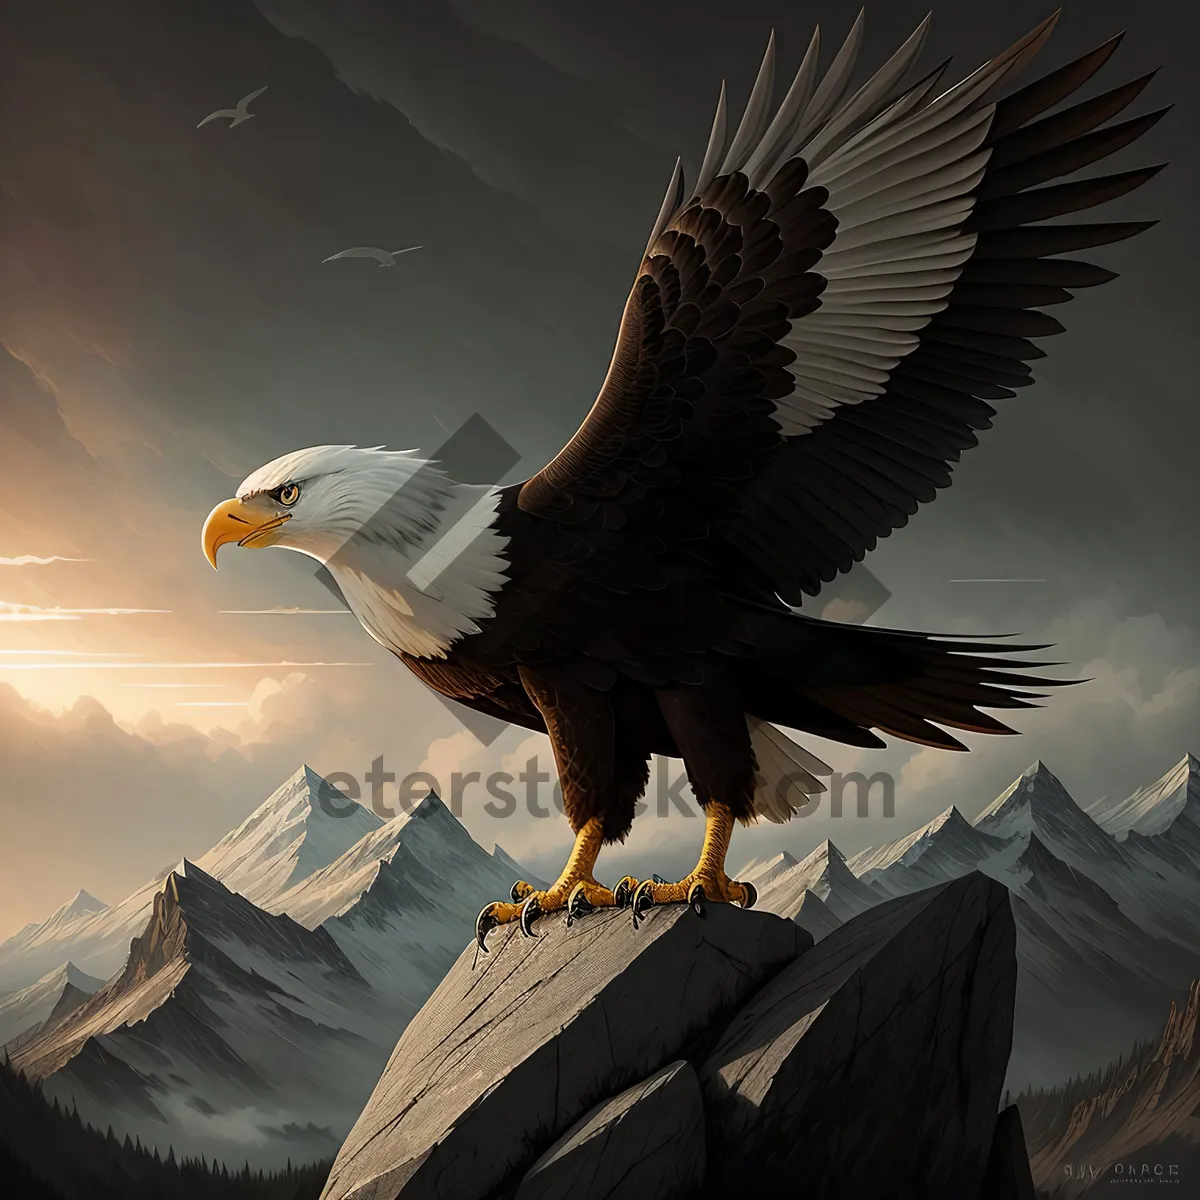 Picture of Bald Eagle Soaring in Majestic Flight